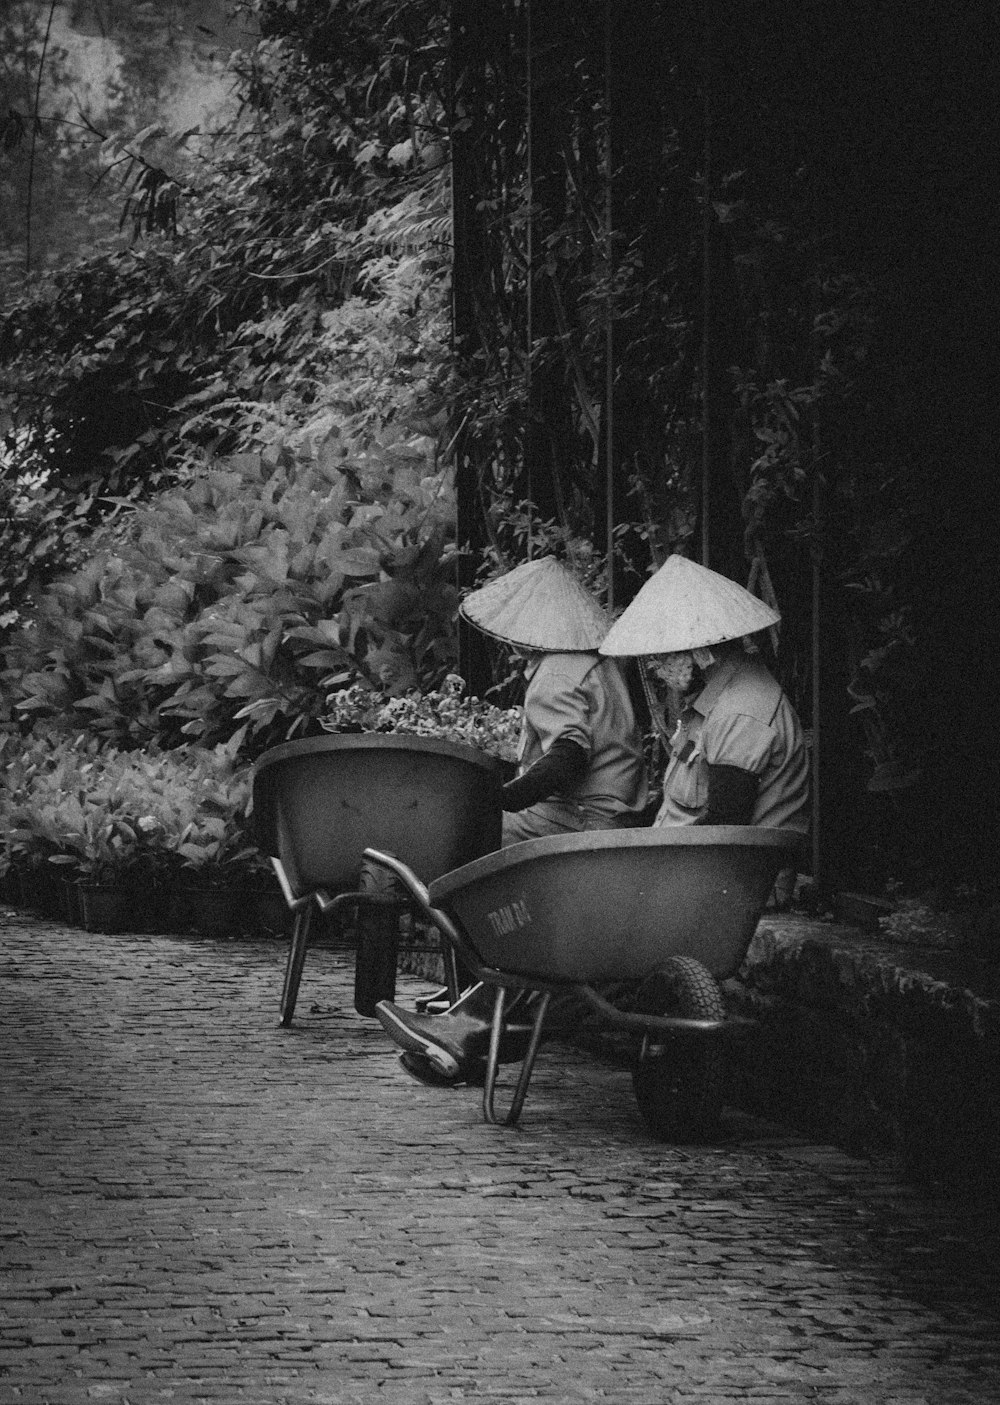 a black and white photo of two people sitting on a bench with umbrellas